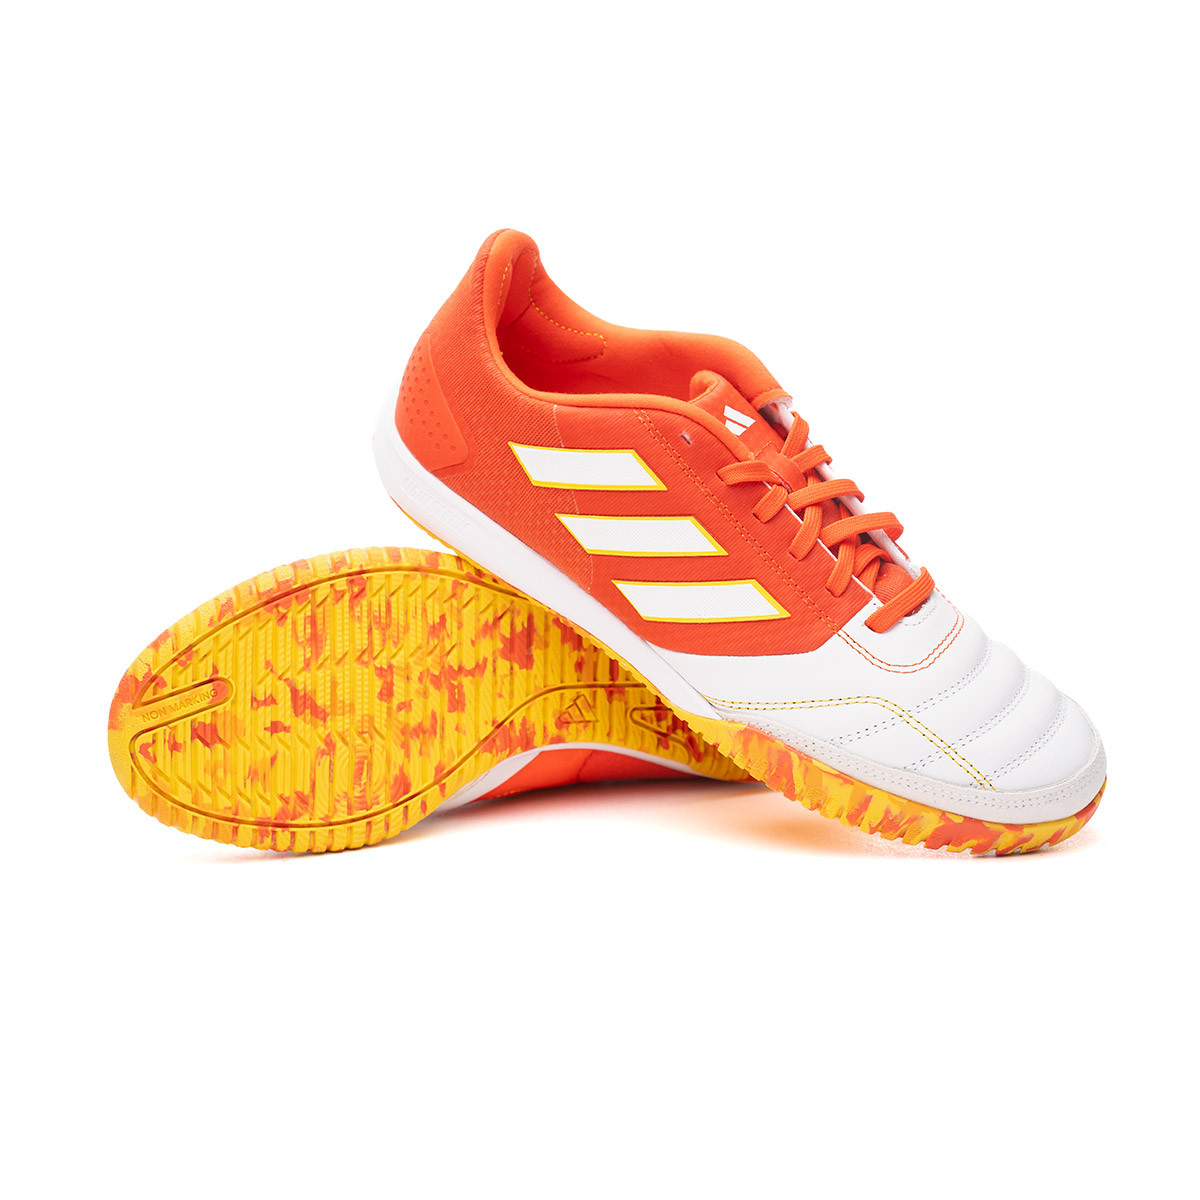 White-Bold Emotion - Fútbol Bold Top Orange-Ftwr adidas Gold boots Competition Sala Indoor